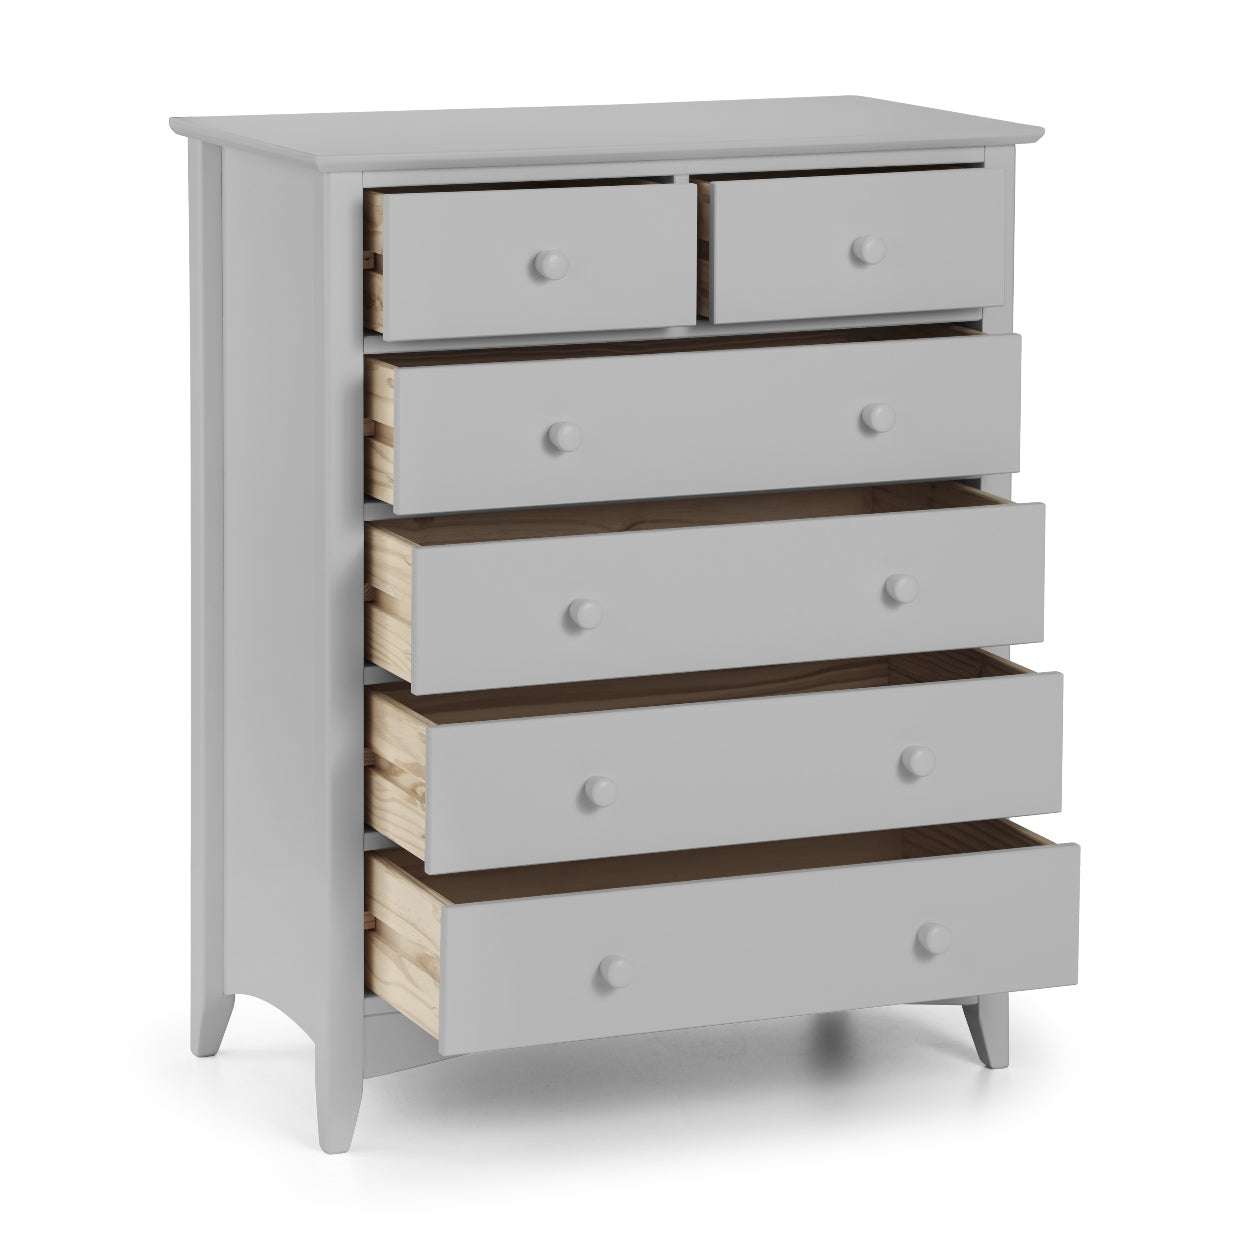 Cameo 4+2 Drawer Chest